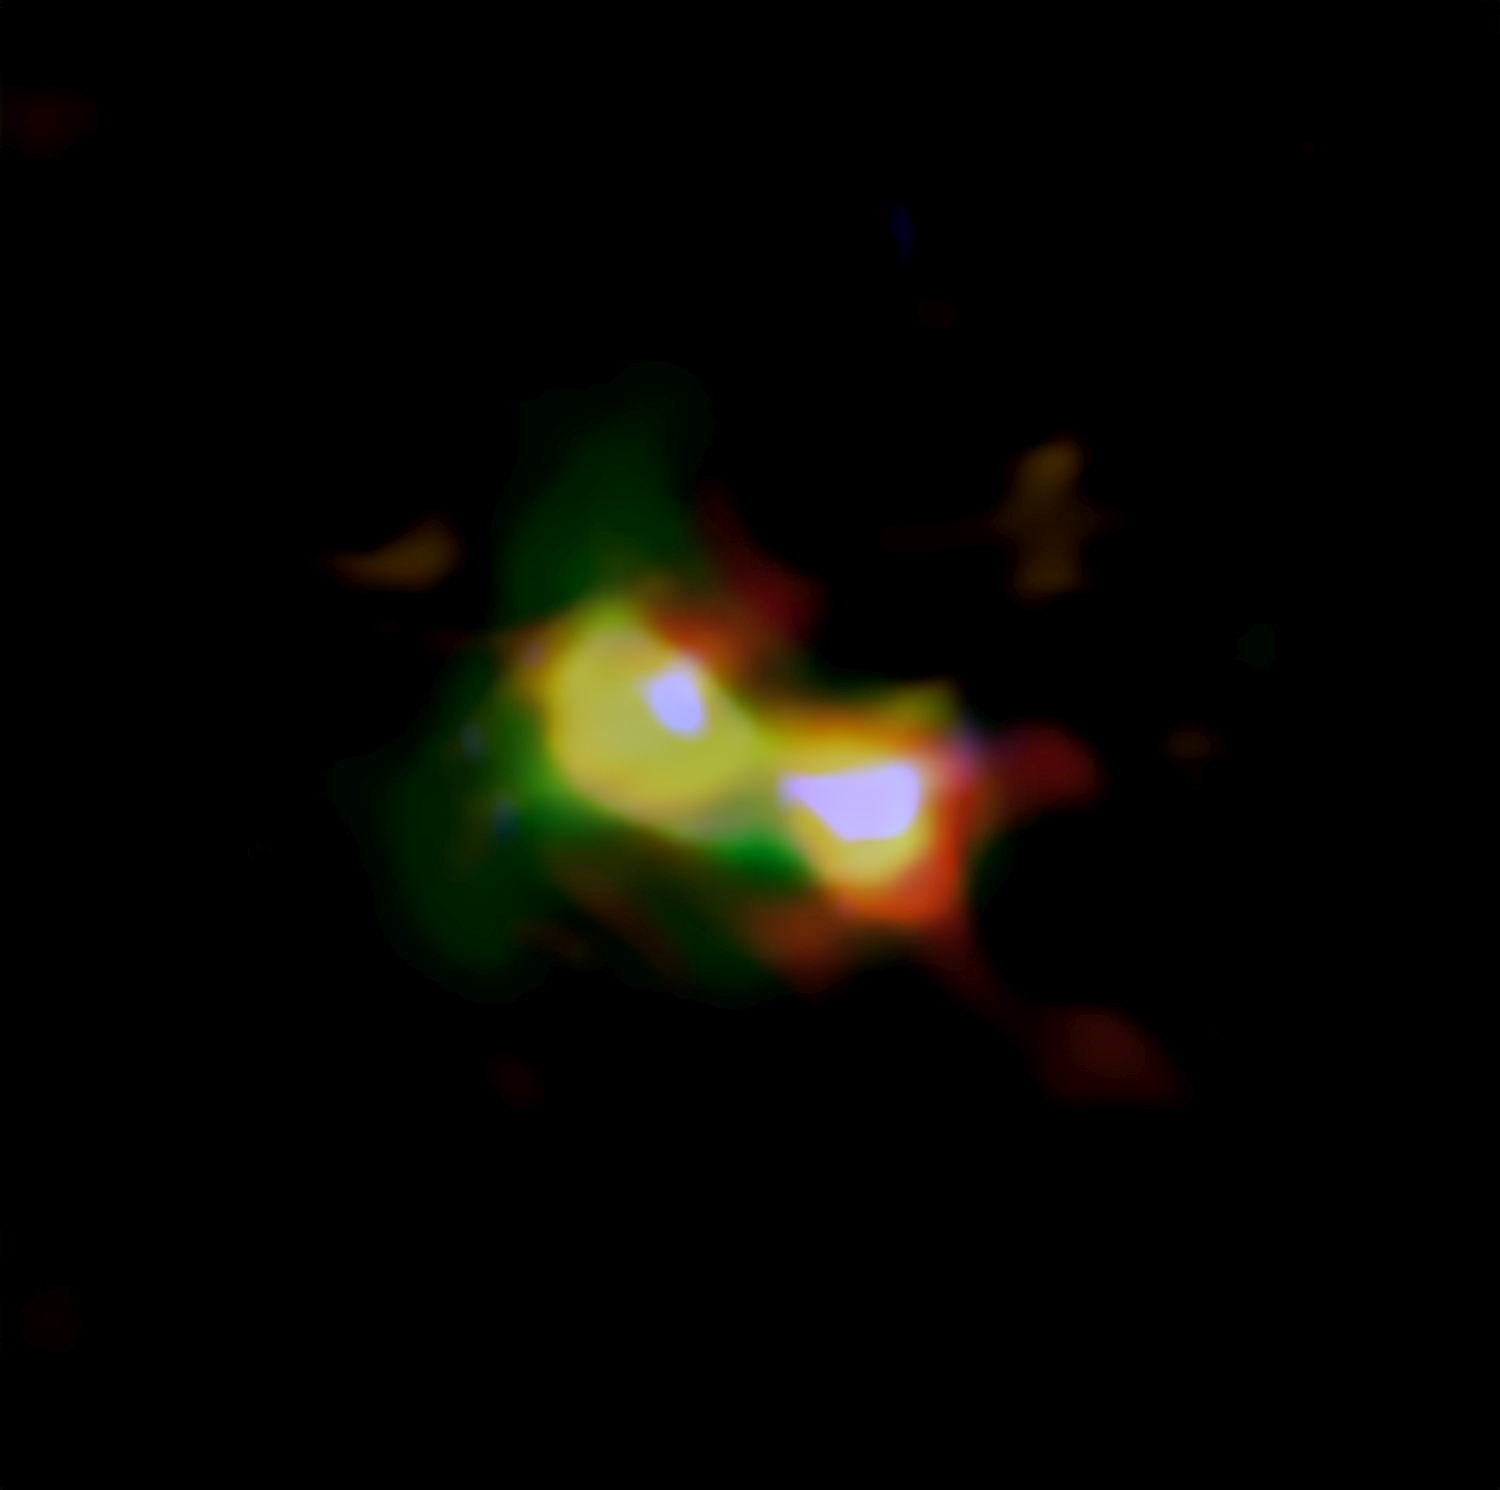 <p>Composite image of B14-65666 showing the distributions of dust (red), oxygen (green), and carbon (blue), observed by ALMA and stars (white) observed by the Hubble Space Telescope. Credit: ALMA (ESO/NAOJ/NRAO), NASA/ESA Hubble Space Telescope, Hashimoto et al.</p>
